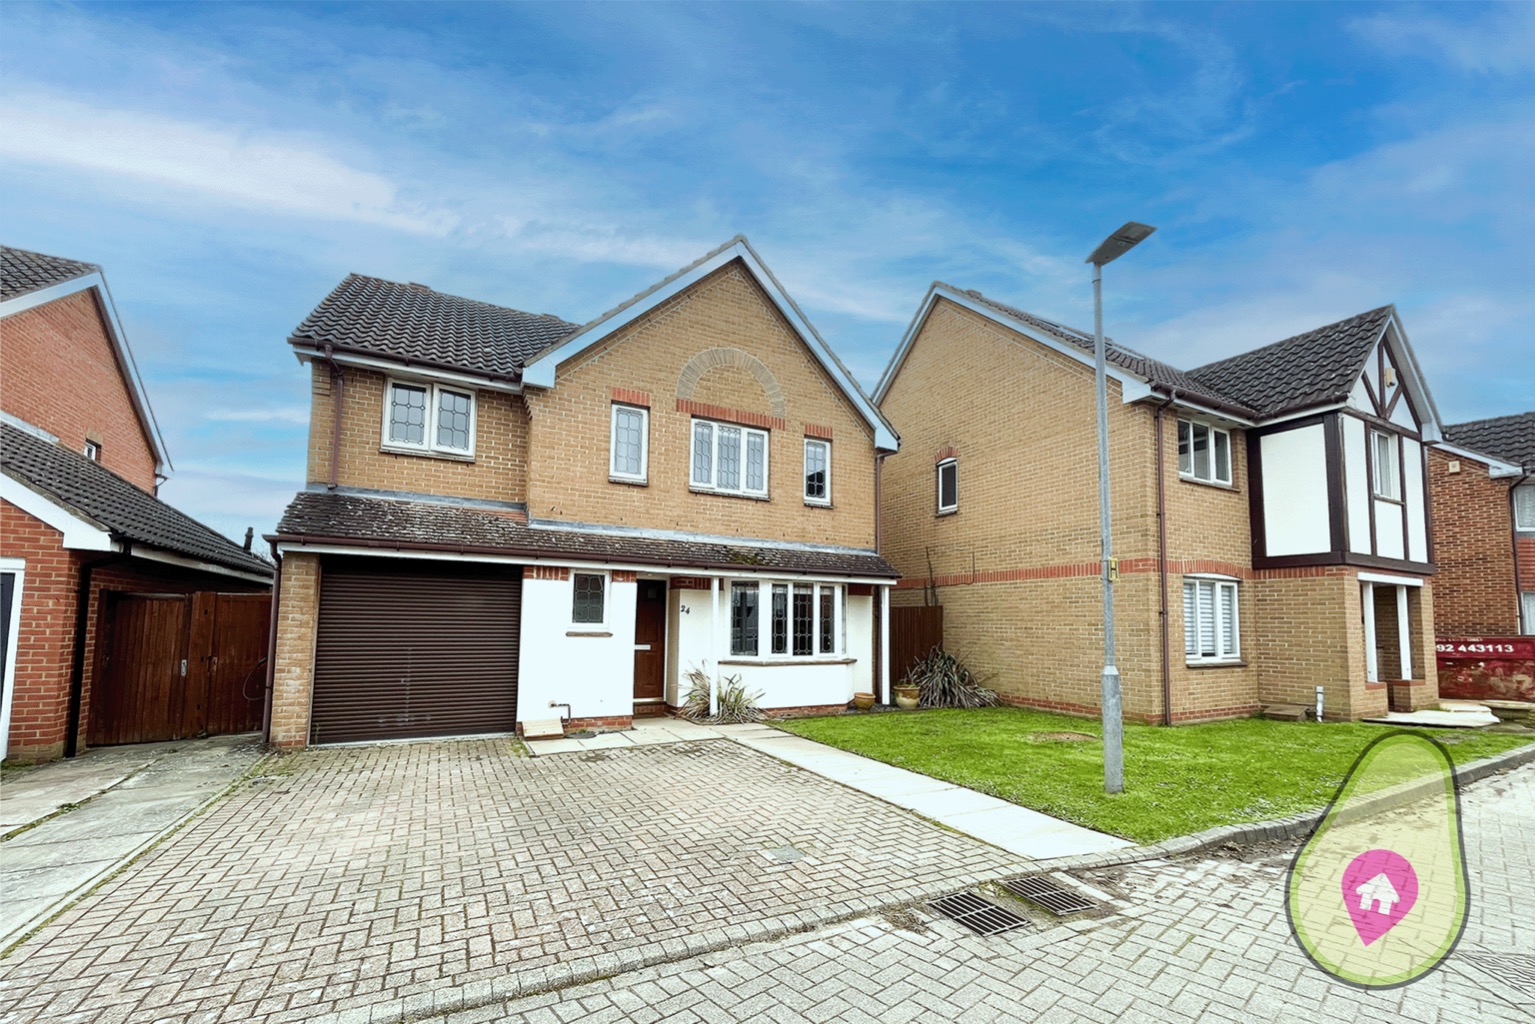 4 bed detached house for sale in Saffron Meadow, Ware - Property Image 1